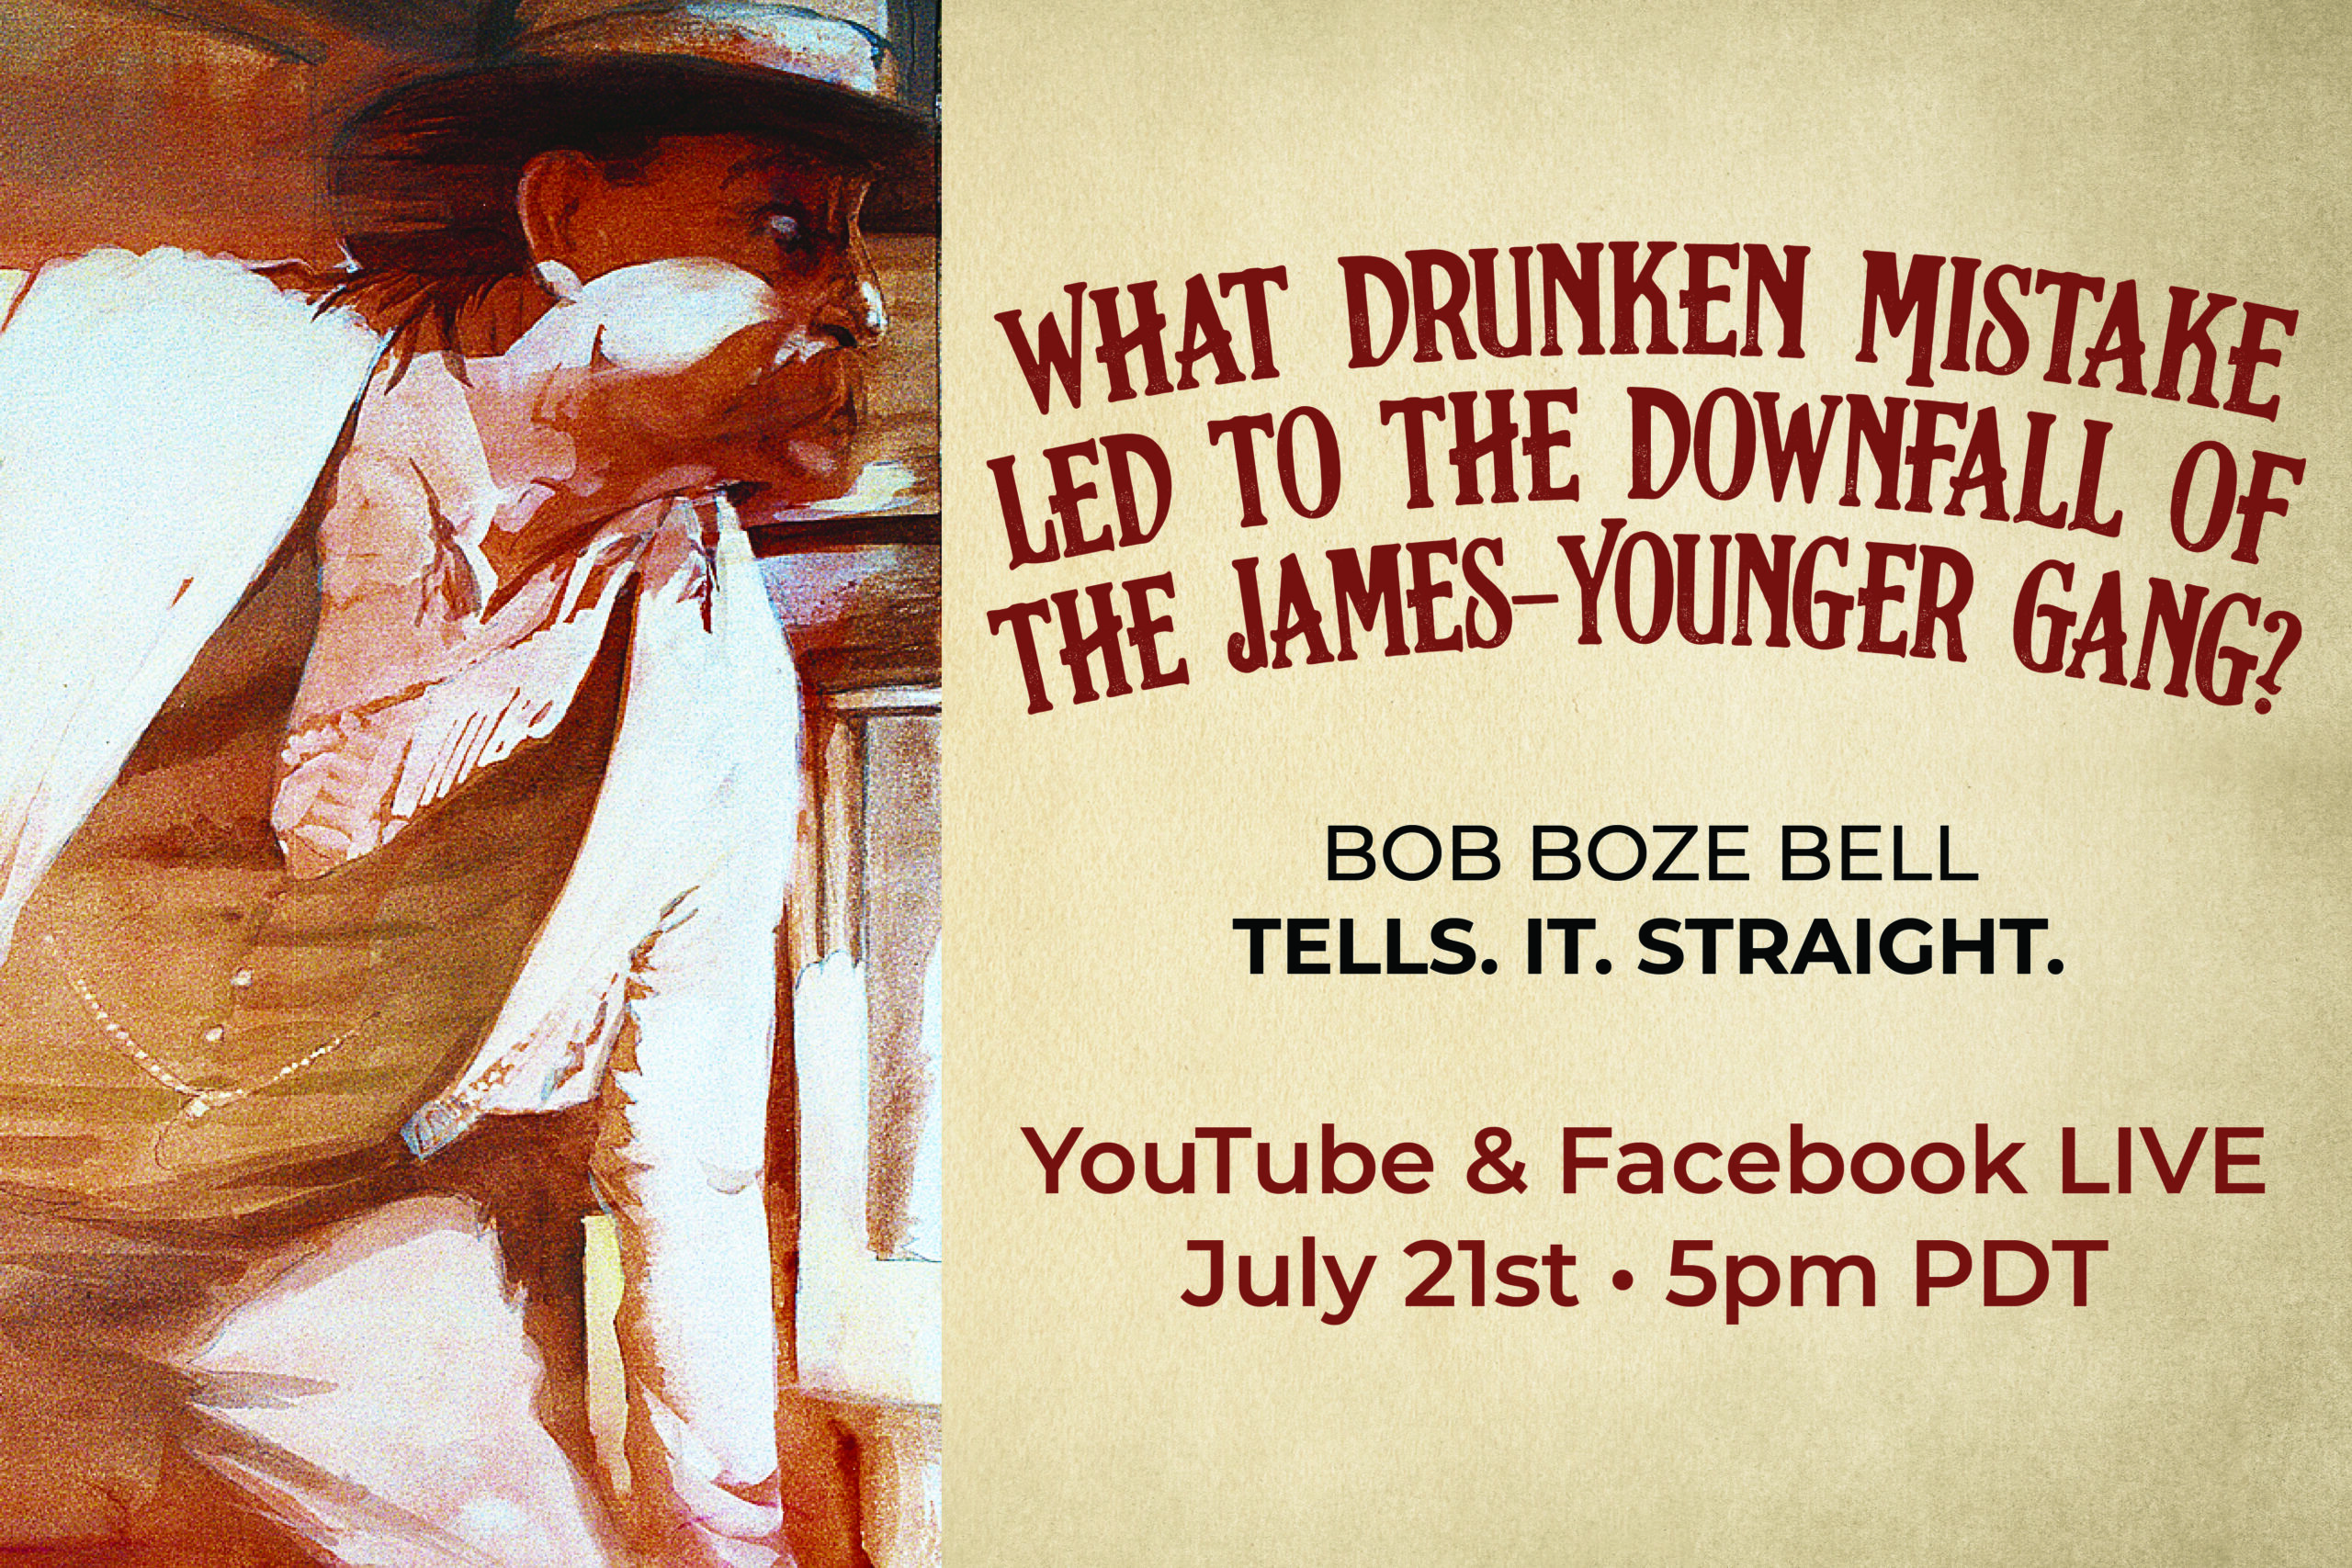 What Drunken Mistake led to the Downfall of the James-Younger Gang? Watch Live 7/21